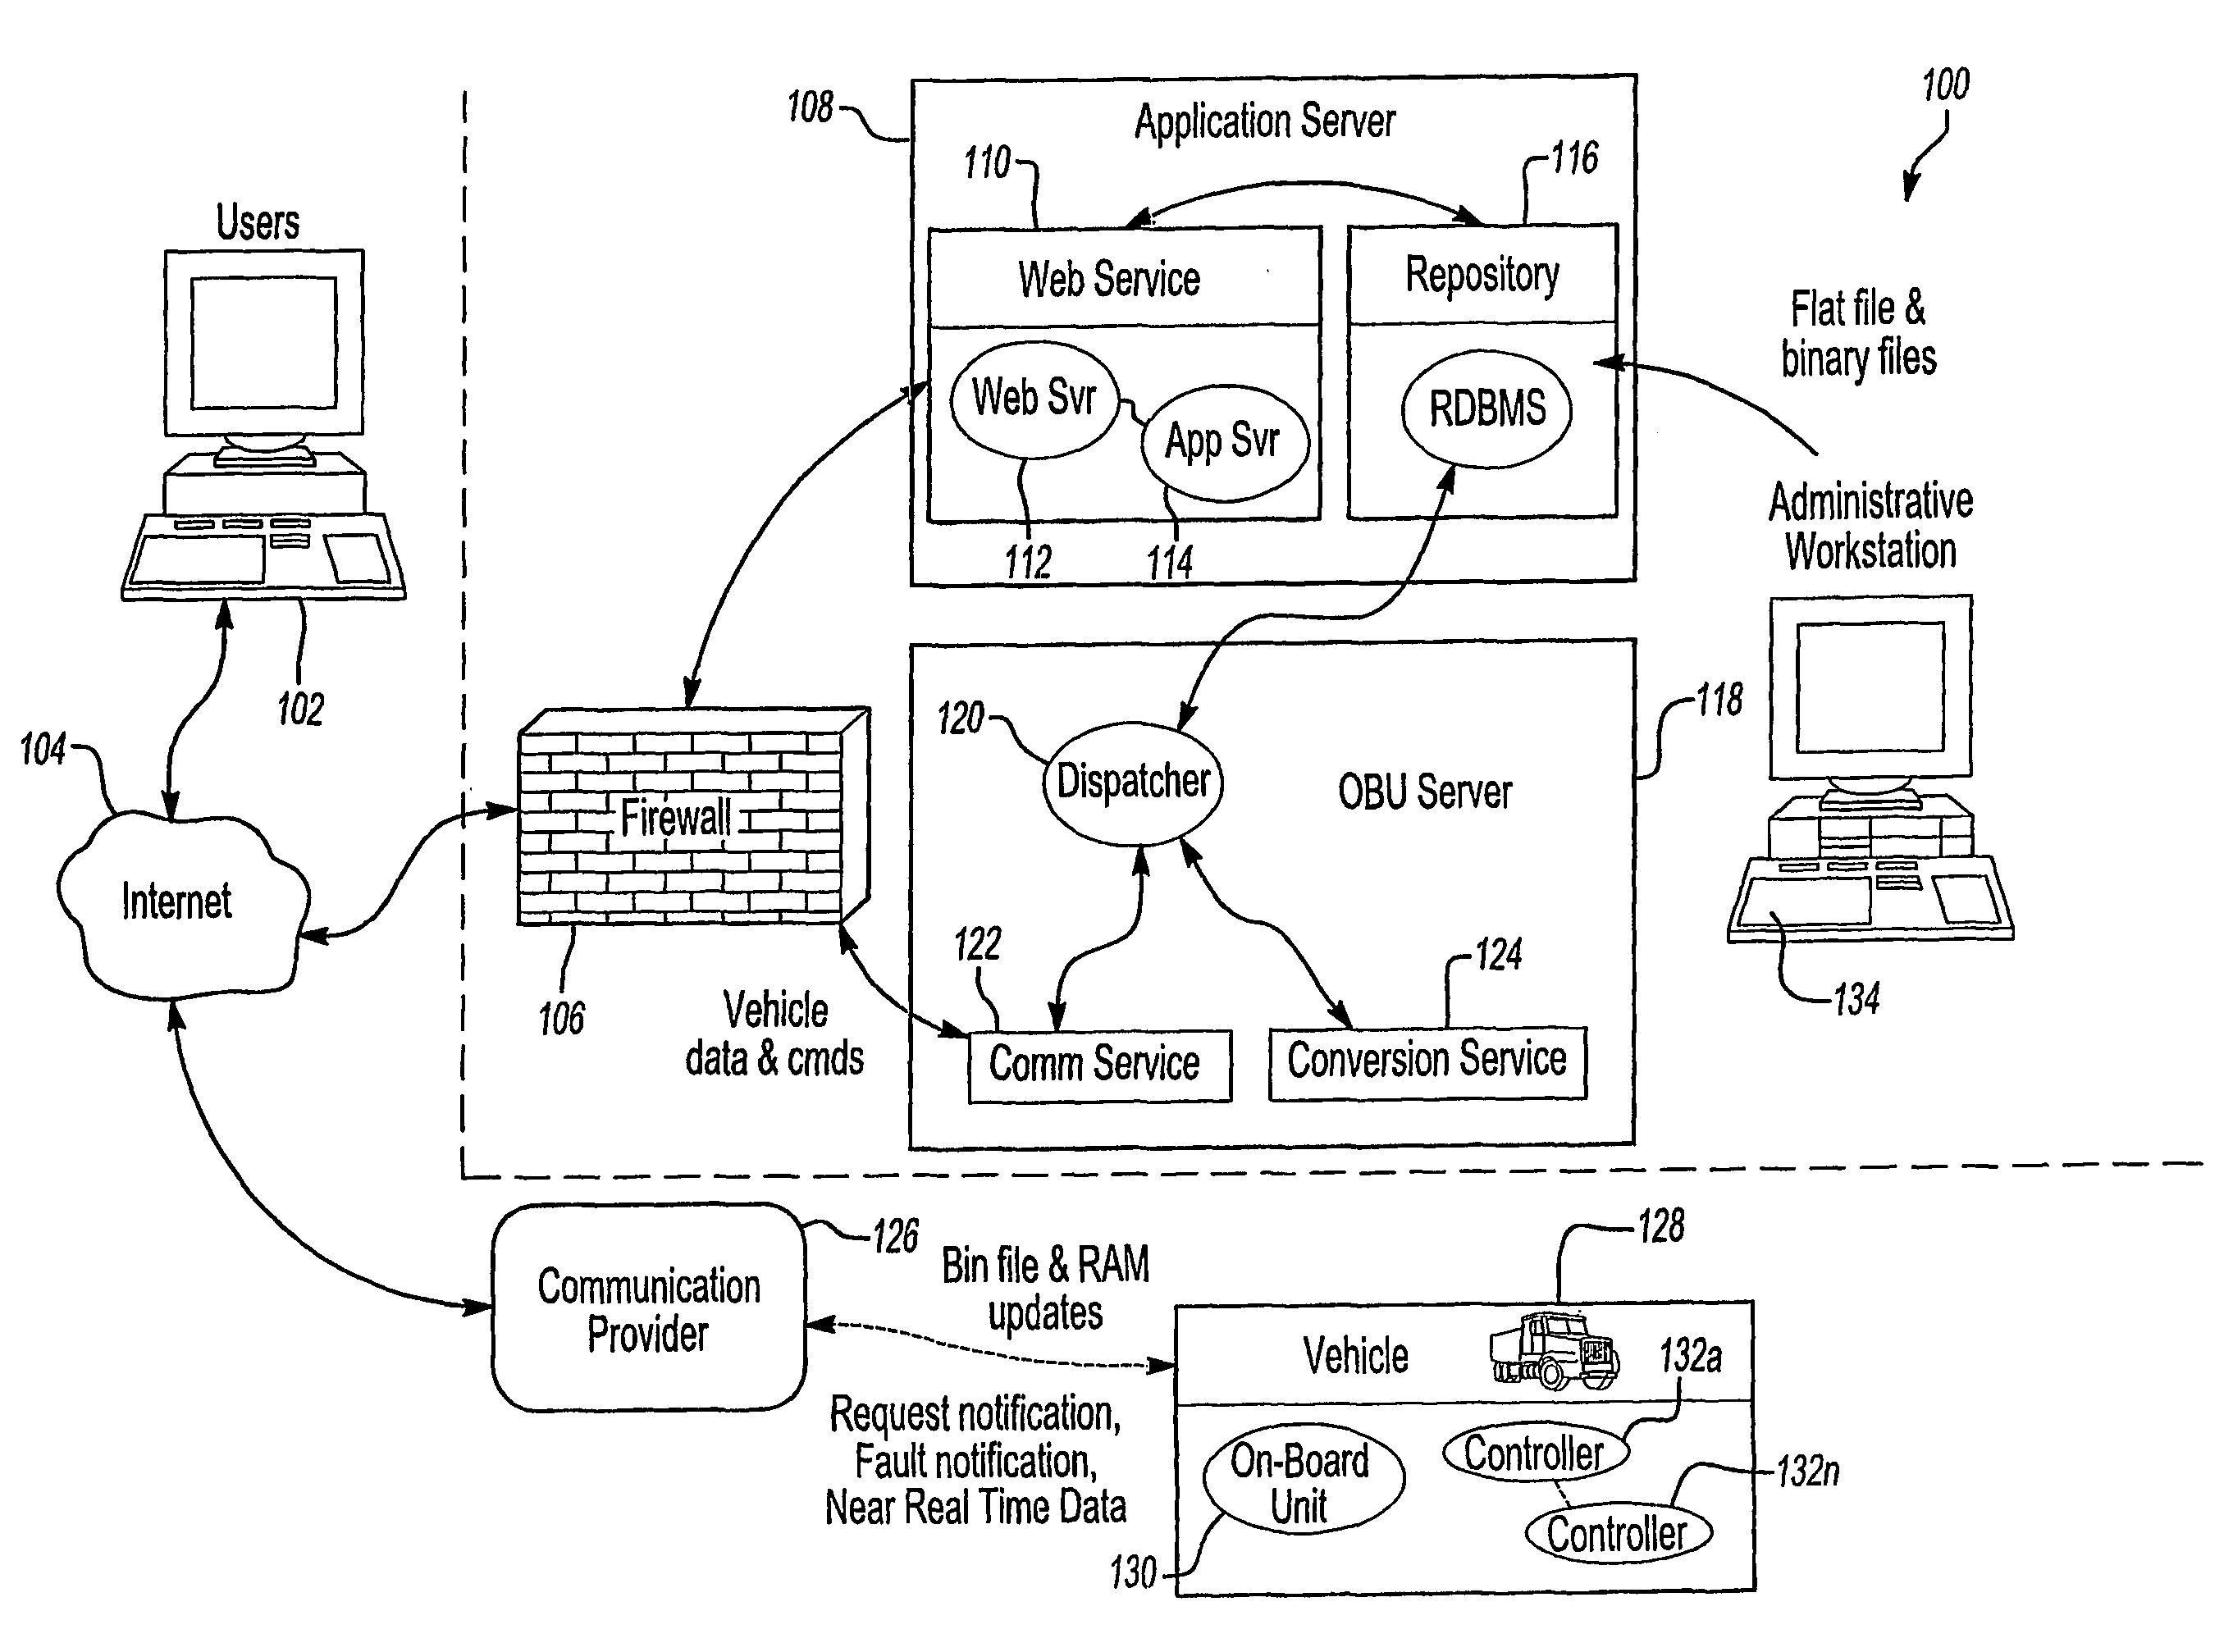 System, method and computer program product for remote vehicle diagnostics, monitoring, configuring and reprogramming